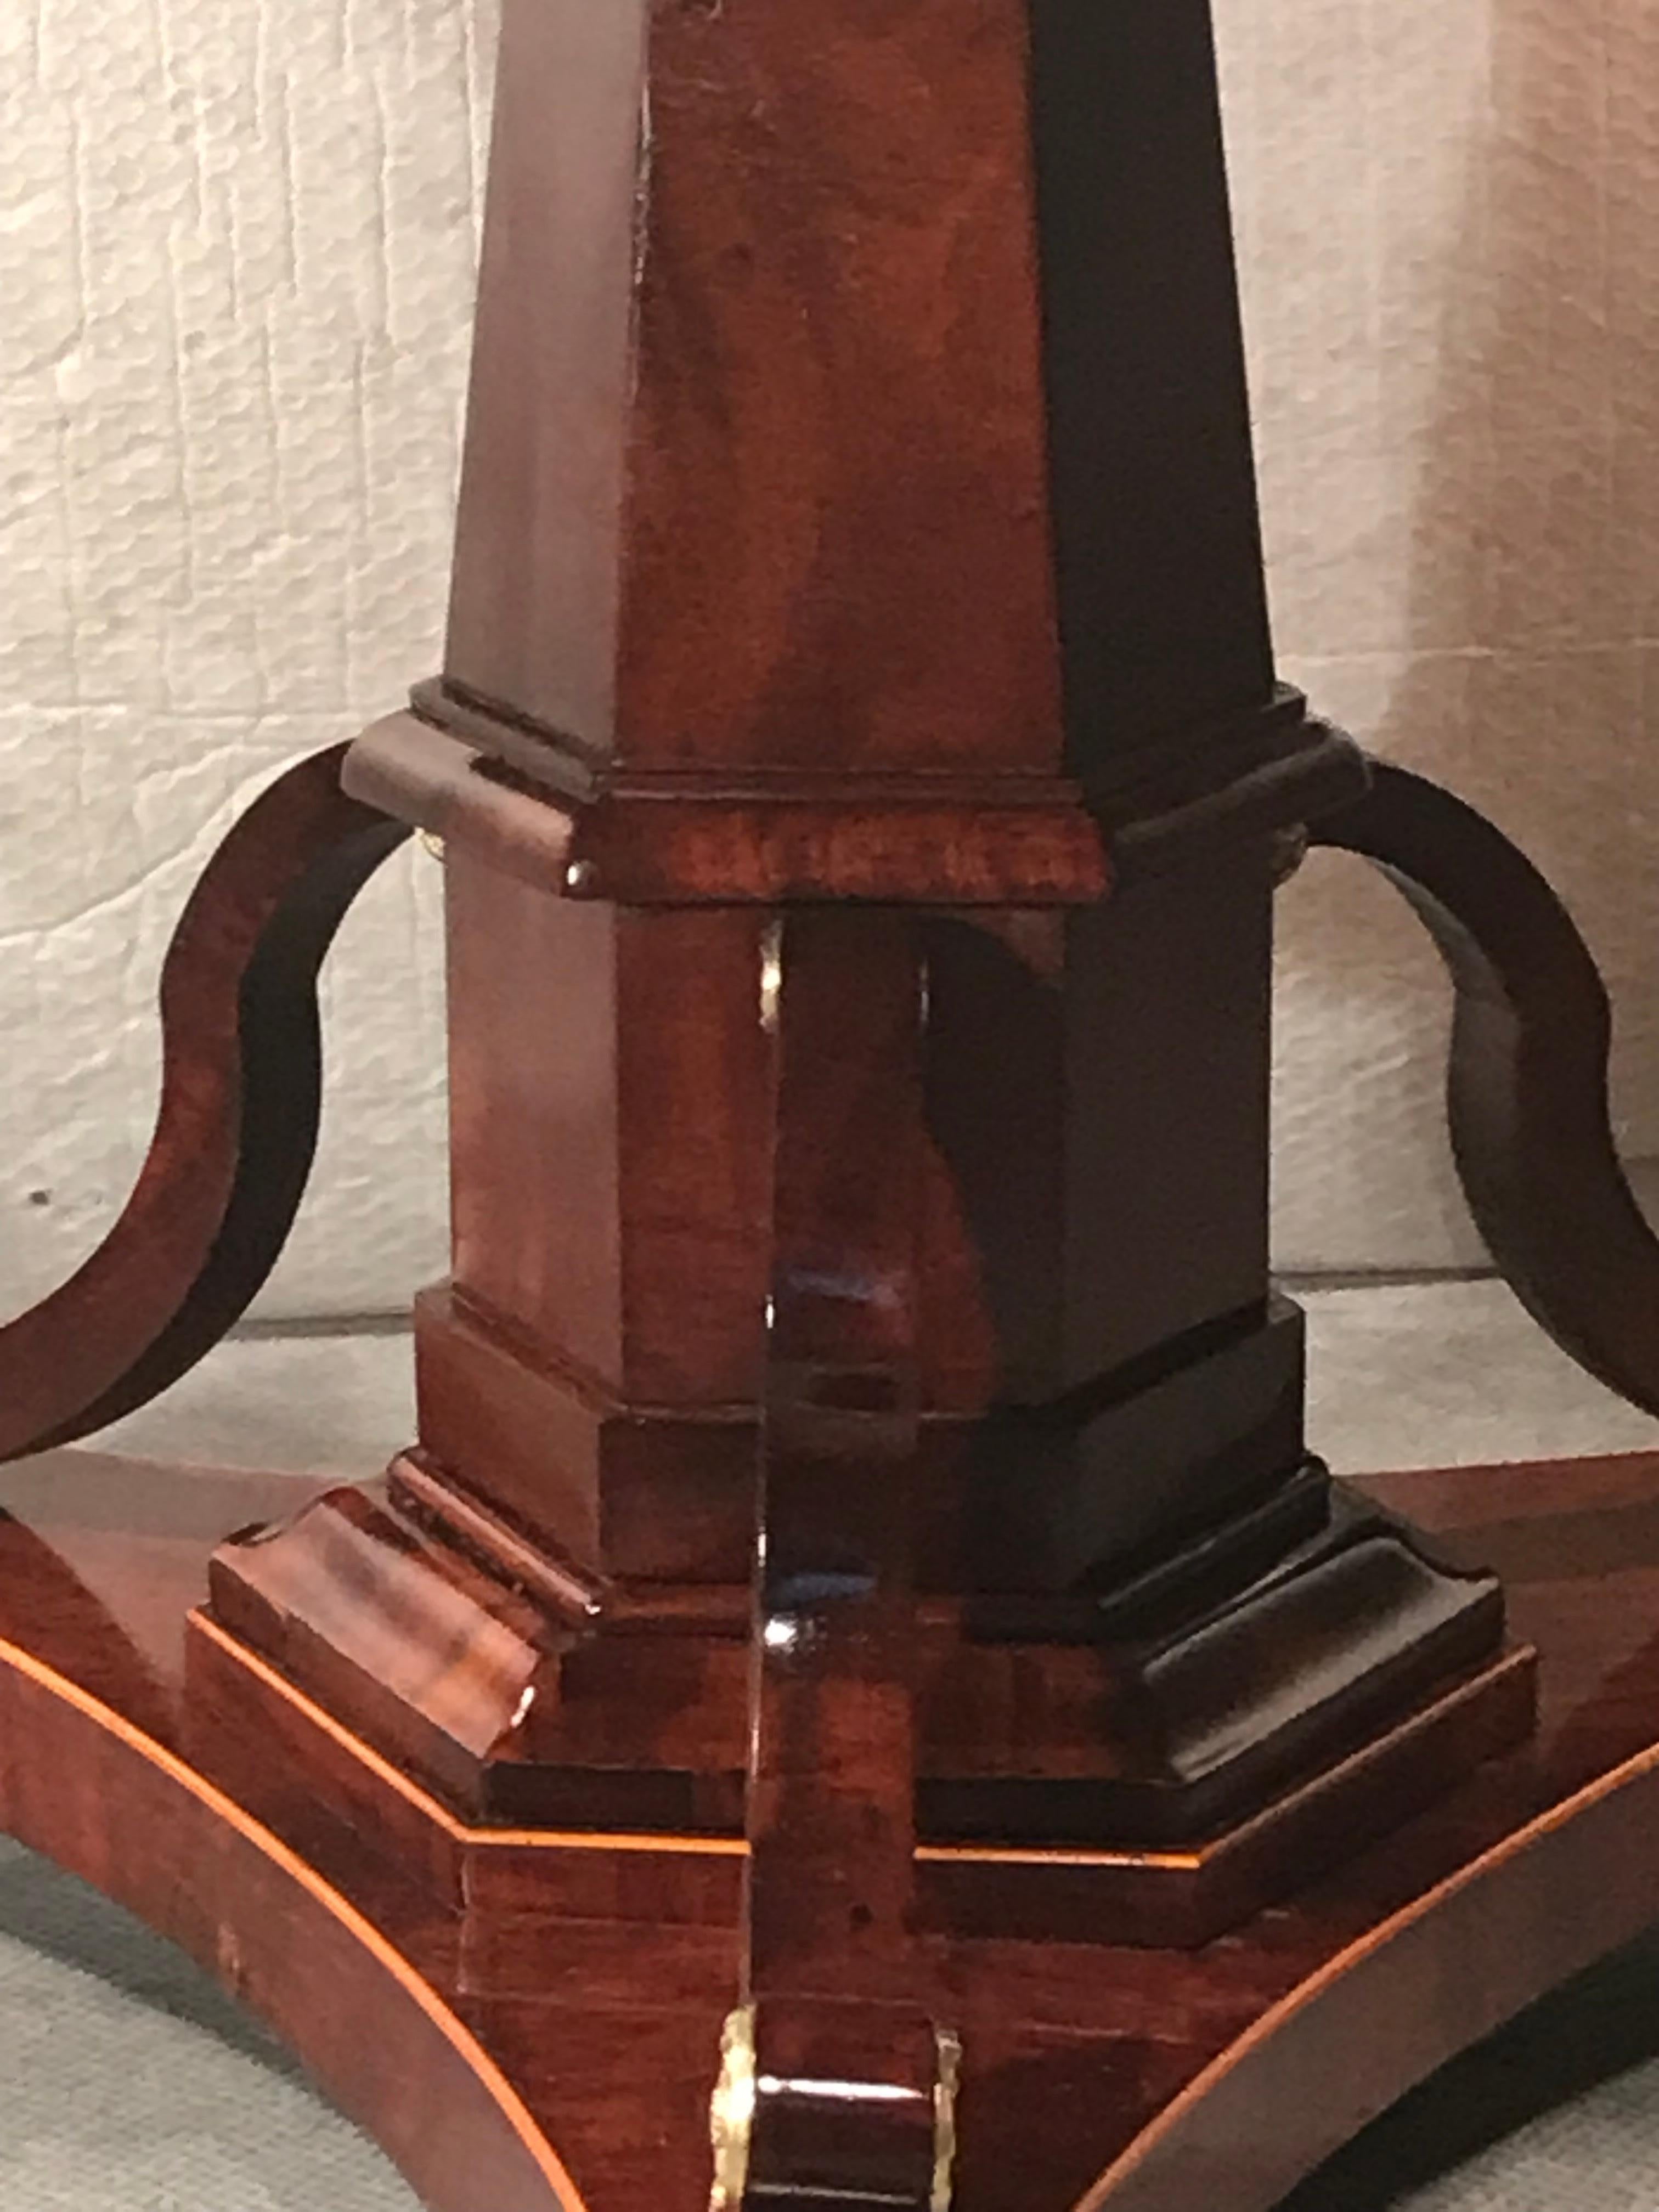 This unique and very elegant Empire table dates back to around 1810-20. It comes from Germany. It was probably made in the northern part of Germany or possibly in Berlin. The table stands out for its beautiful mahogany veneer and the exquisitely